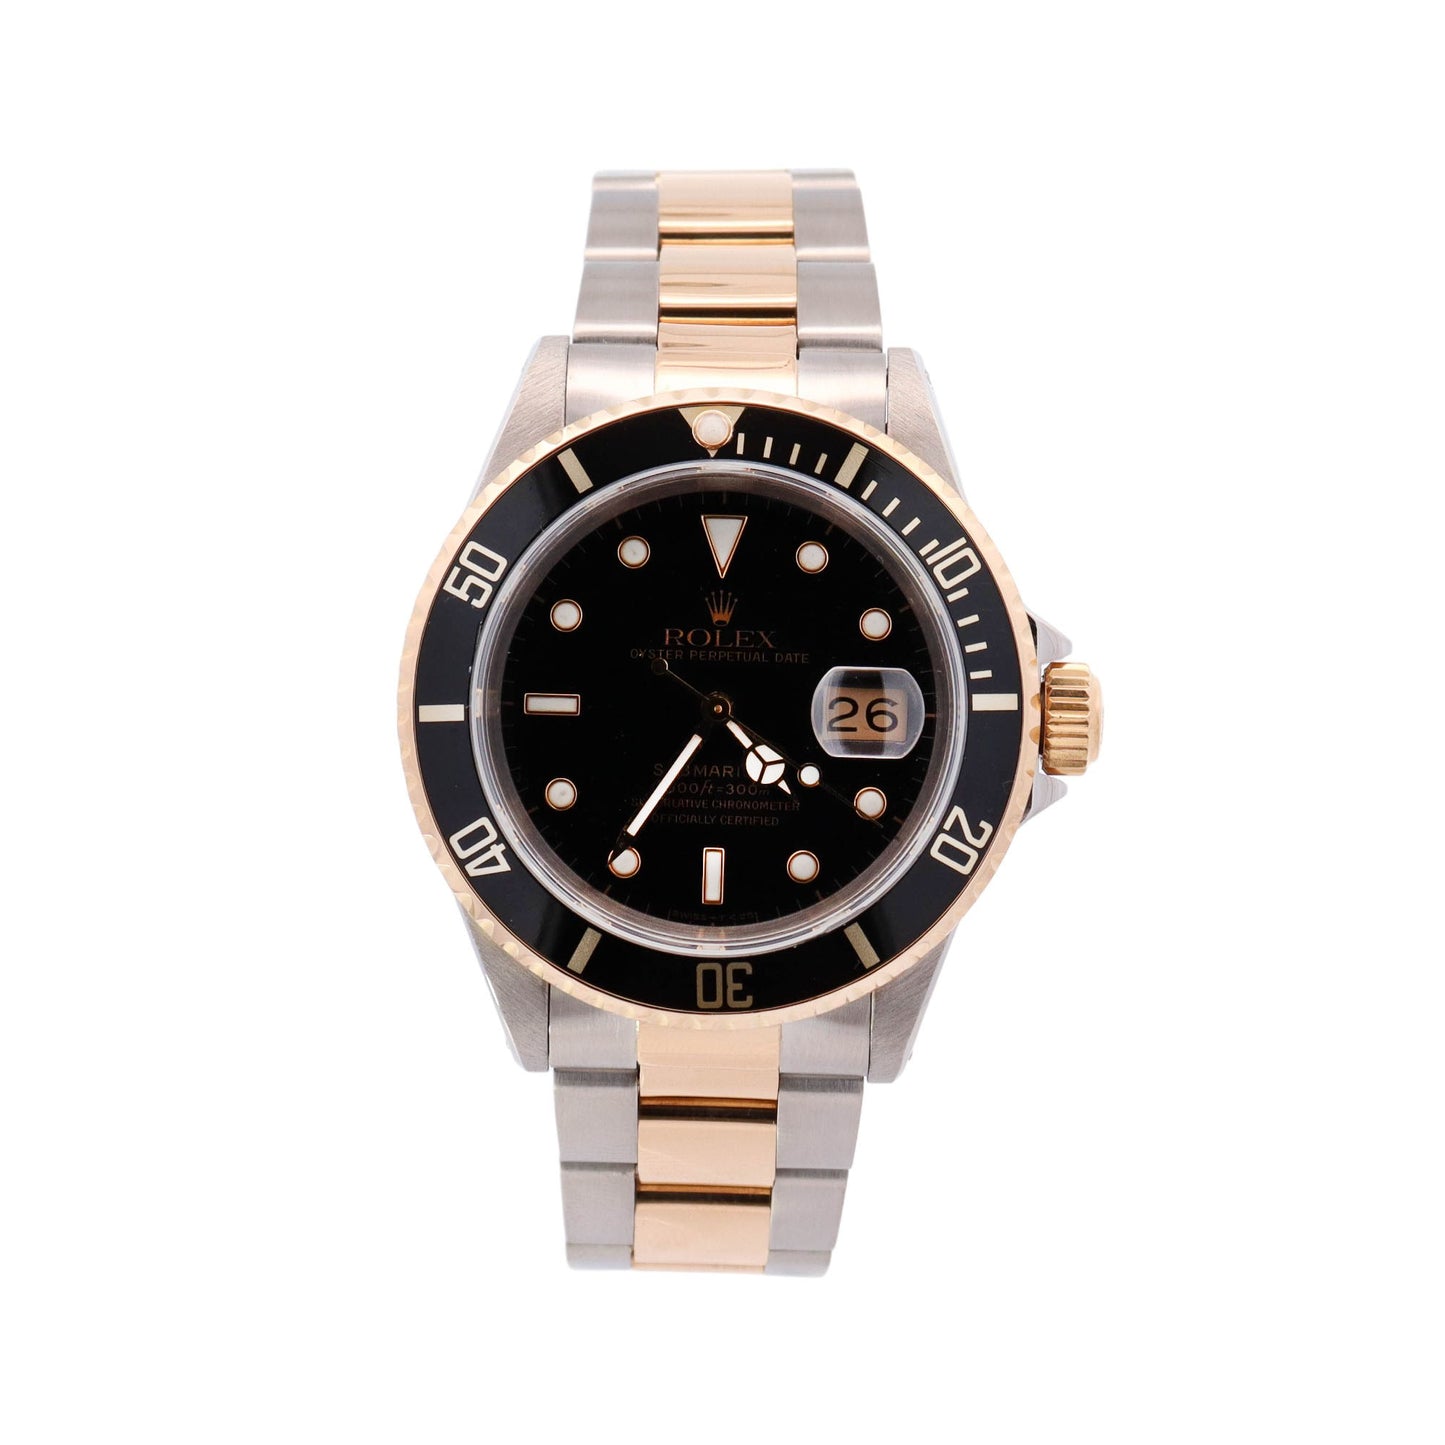 Rolex Submariner Two Tone Yellow Gold & Steel 36mm Black Dot Dial Watch Reference #: 16613LN